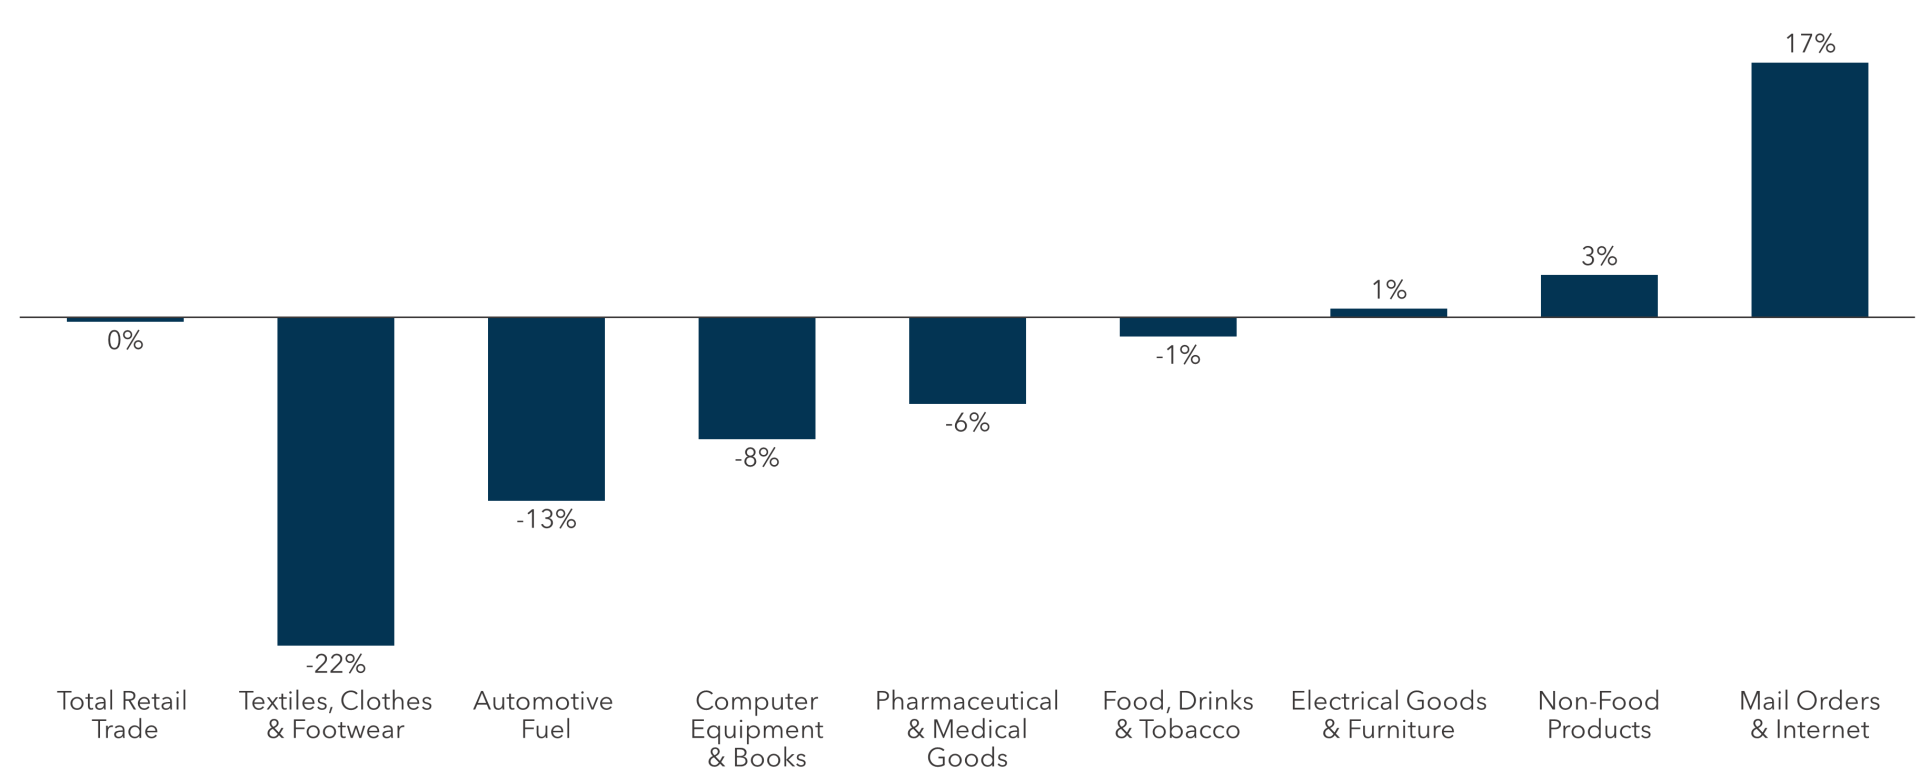 FIGURE 6: Retail Trade Volume Growth Rates by Product Type, EU (June 2020 compared with February 2020)